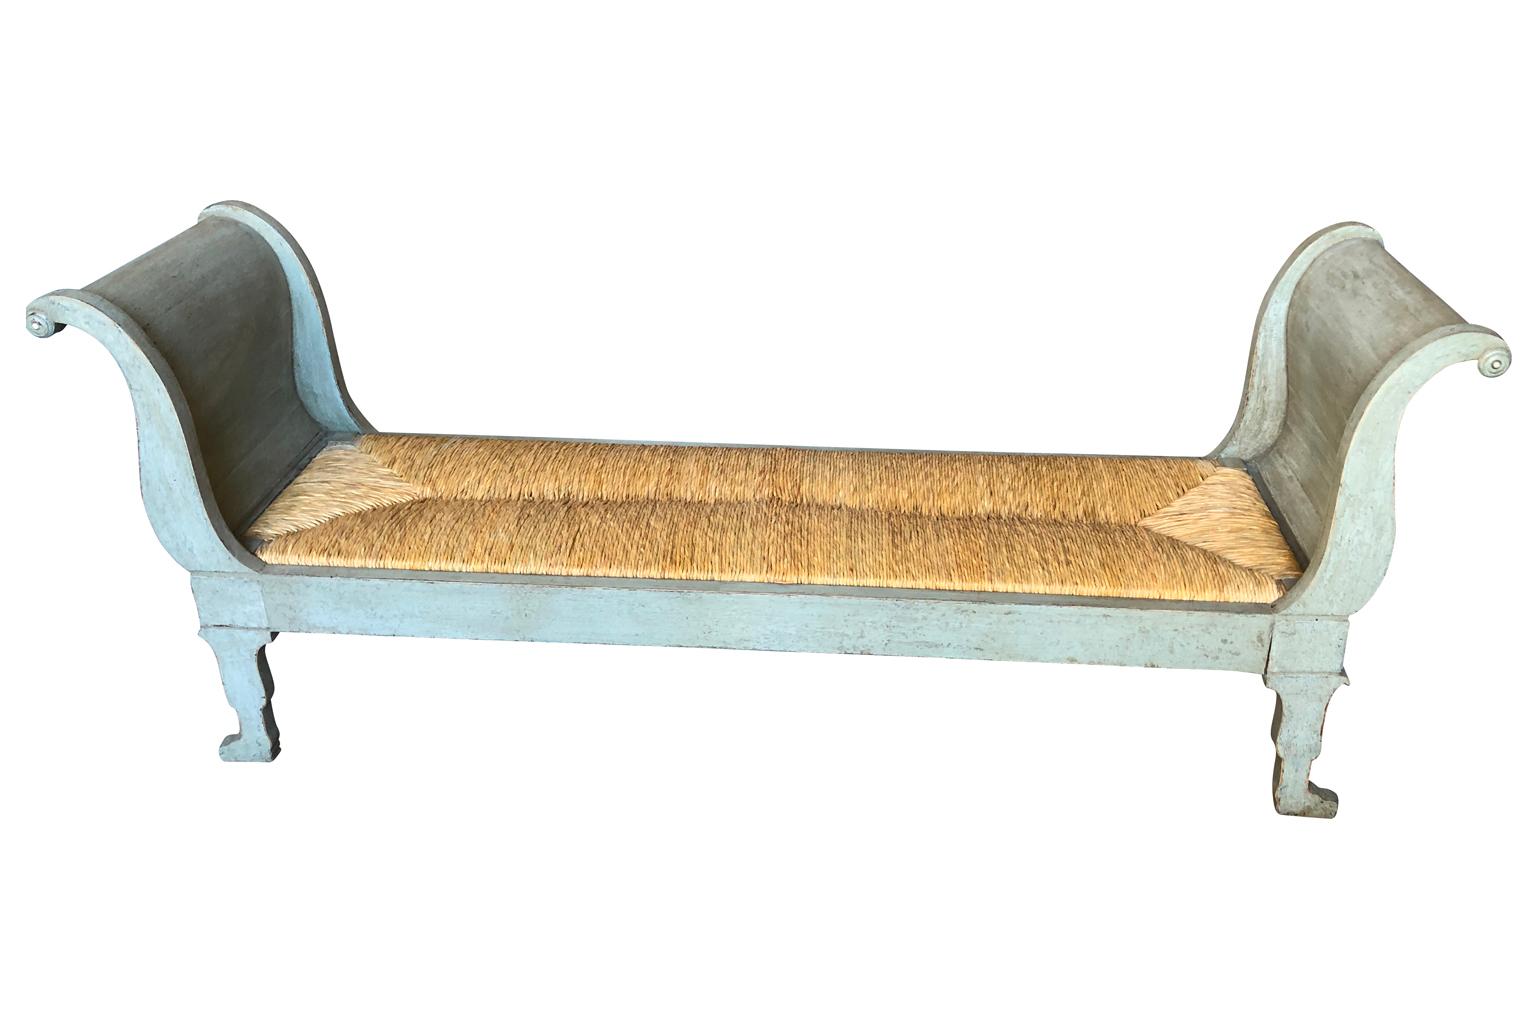 A delightful Italian later 19th century banquette in painted wood and rush seat. Wonderful form. Perfect at the foot of a bed or under a picture window. The seat height is 14 3/4